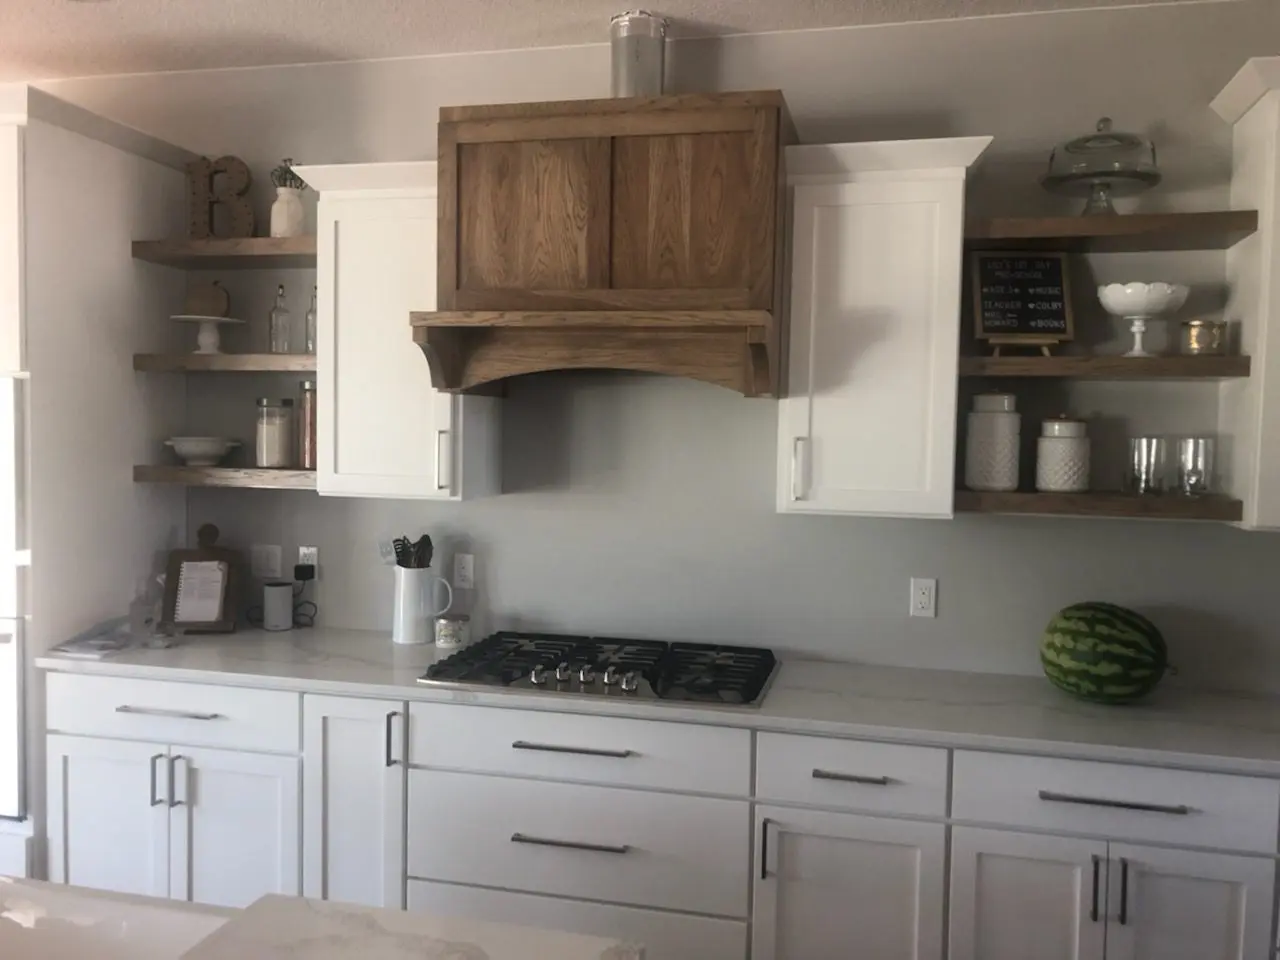 The custom and prefab kitchen decor with floating shelves